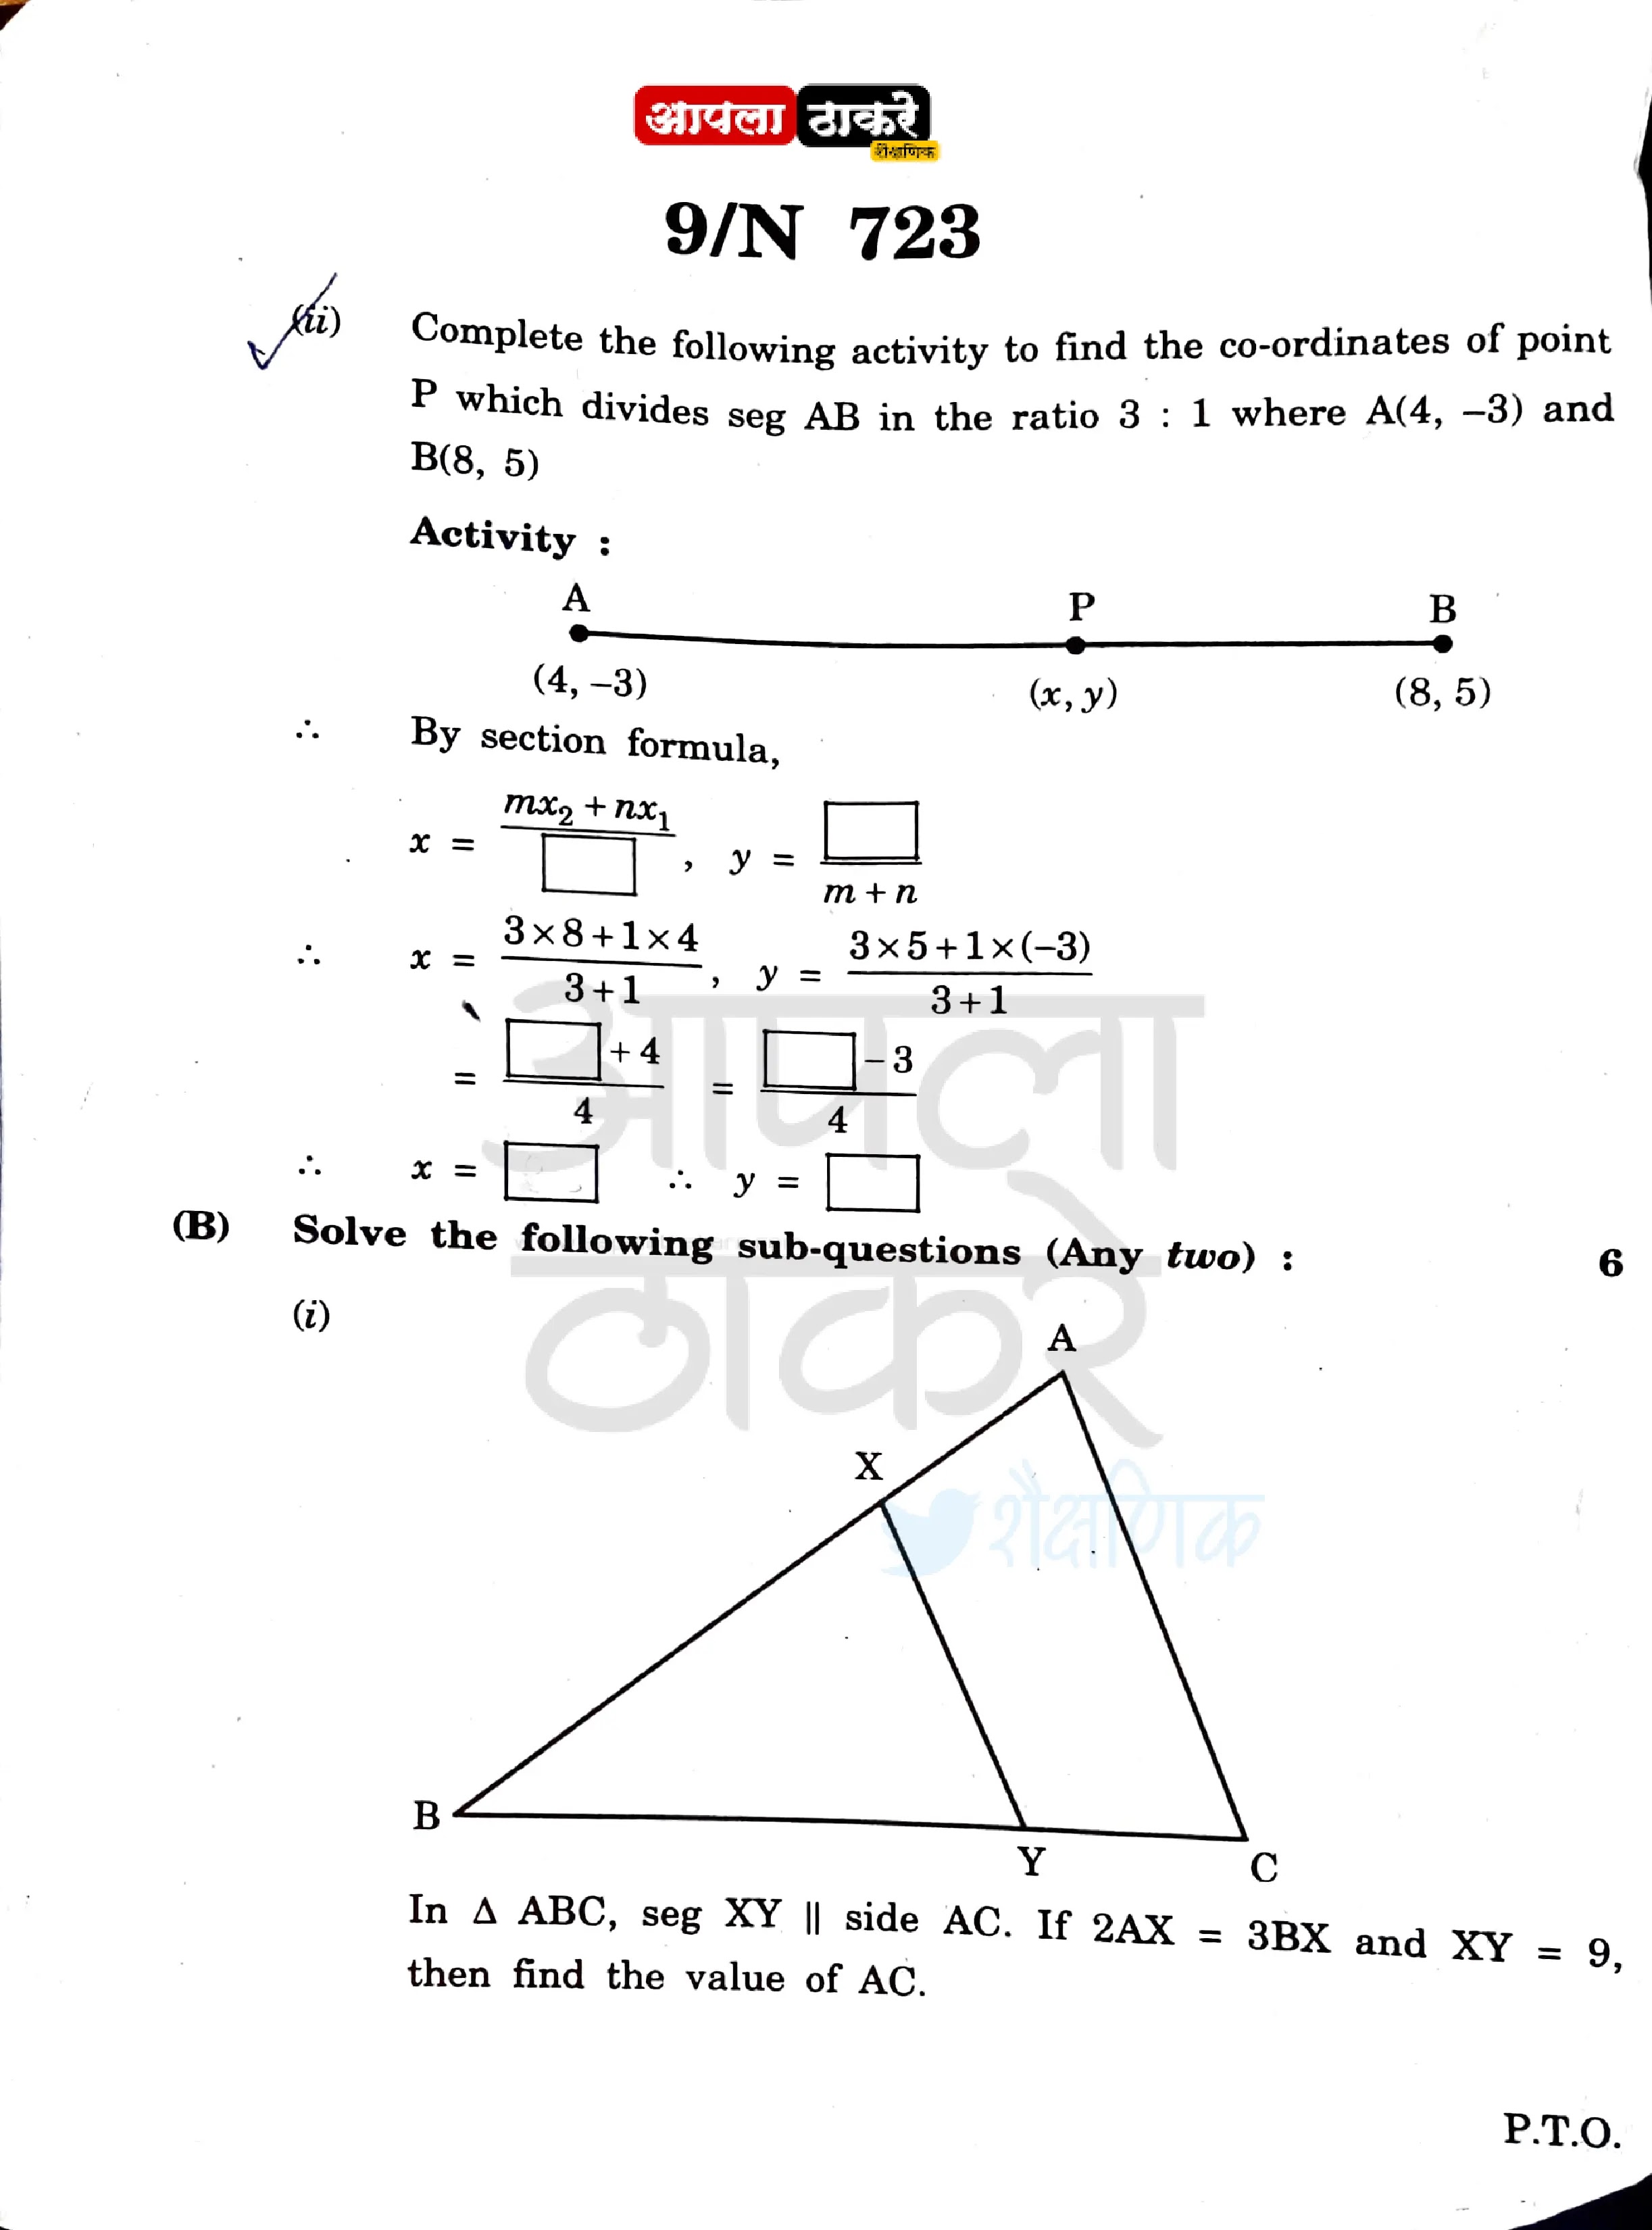 10th class geometry question paper,grade 10 geometry exam papers,10th class question paper and answer,10th class question papers 2017,10th grade geometry answers,10th ssc board geometry question paper 2022,10th ssc board geometry question paper 2022 pdf,10th ssc board geometry question paper 2019,10th ssc board geometry question paper 2019 pdf,10th 2019 question paper with answer